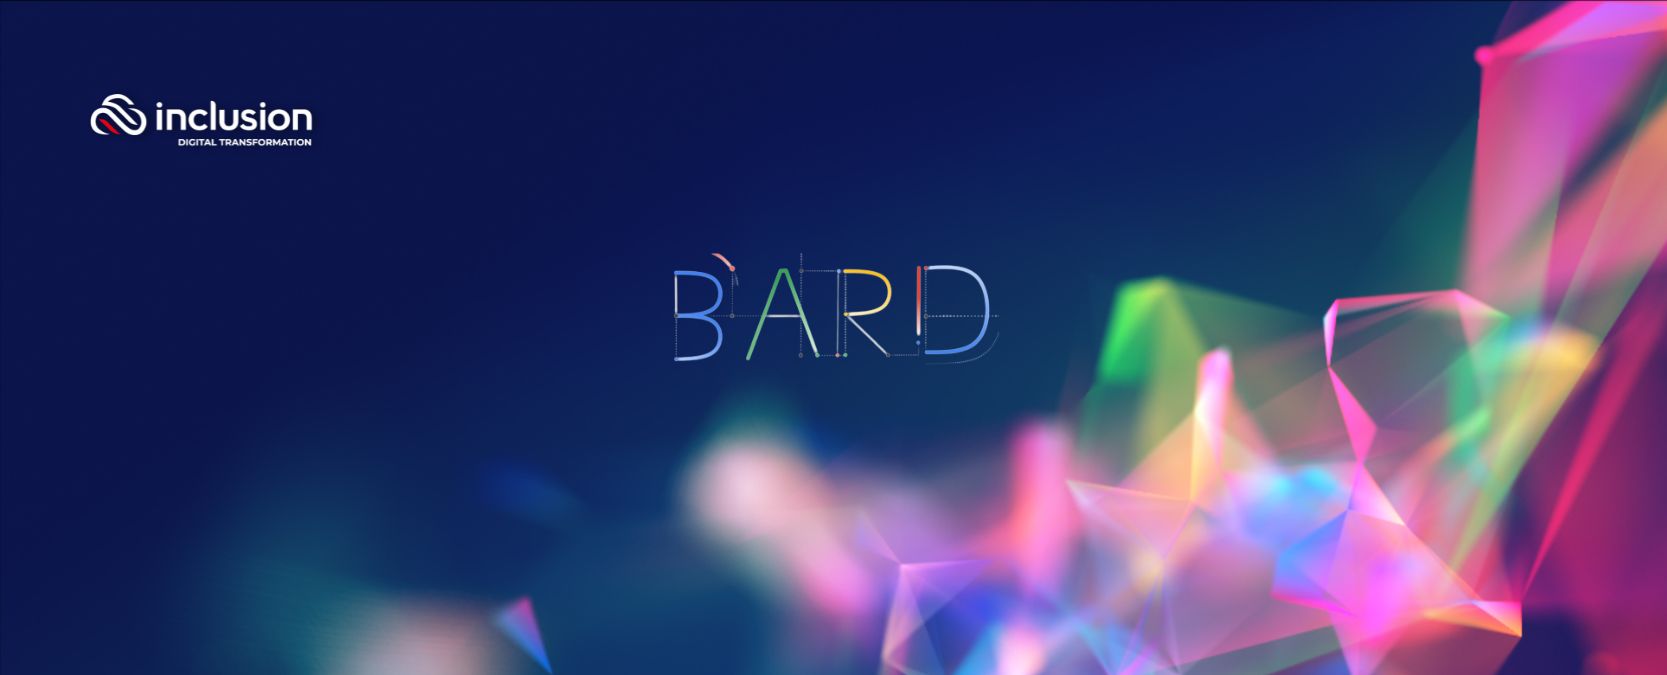 Google Bard A Powerful New AI Tool for Content Creation, Productivity, and Innovation